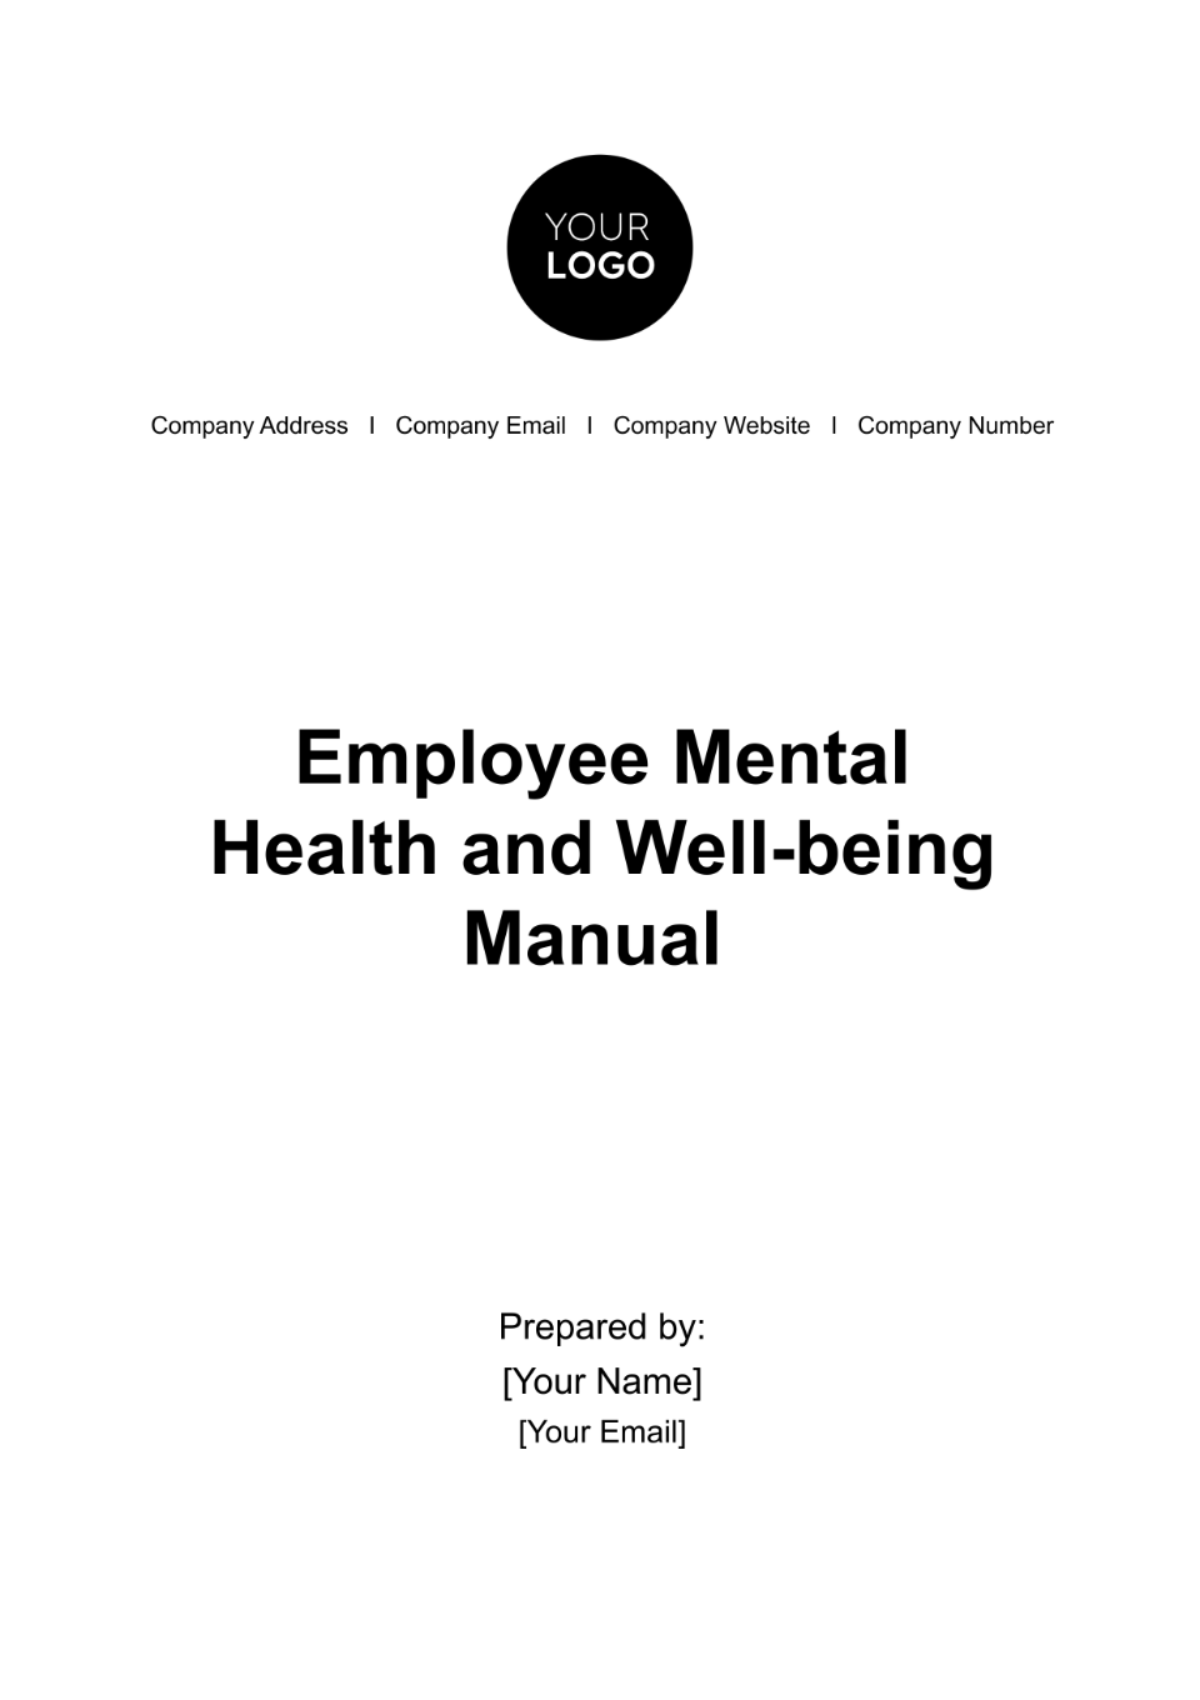 Employee Mental Health and Well-being Manual HR Template